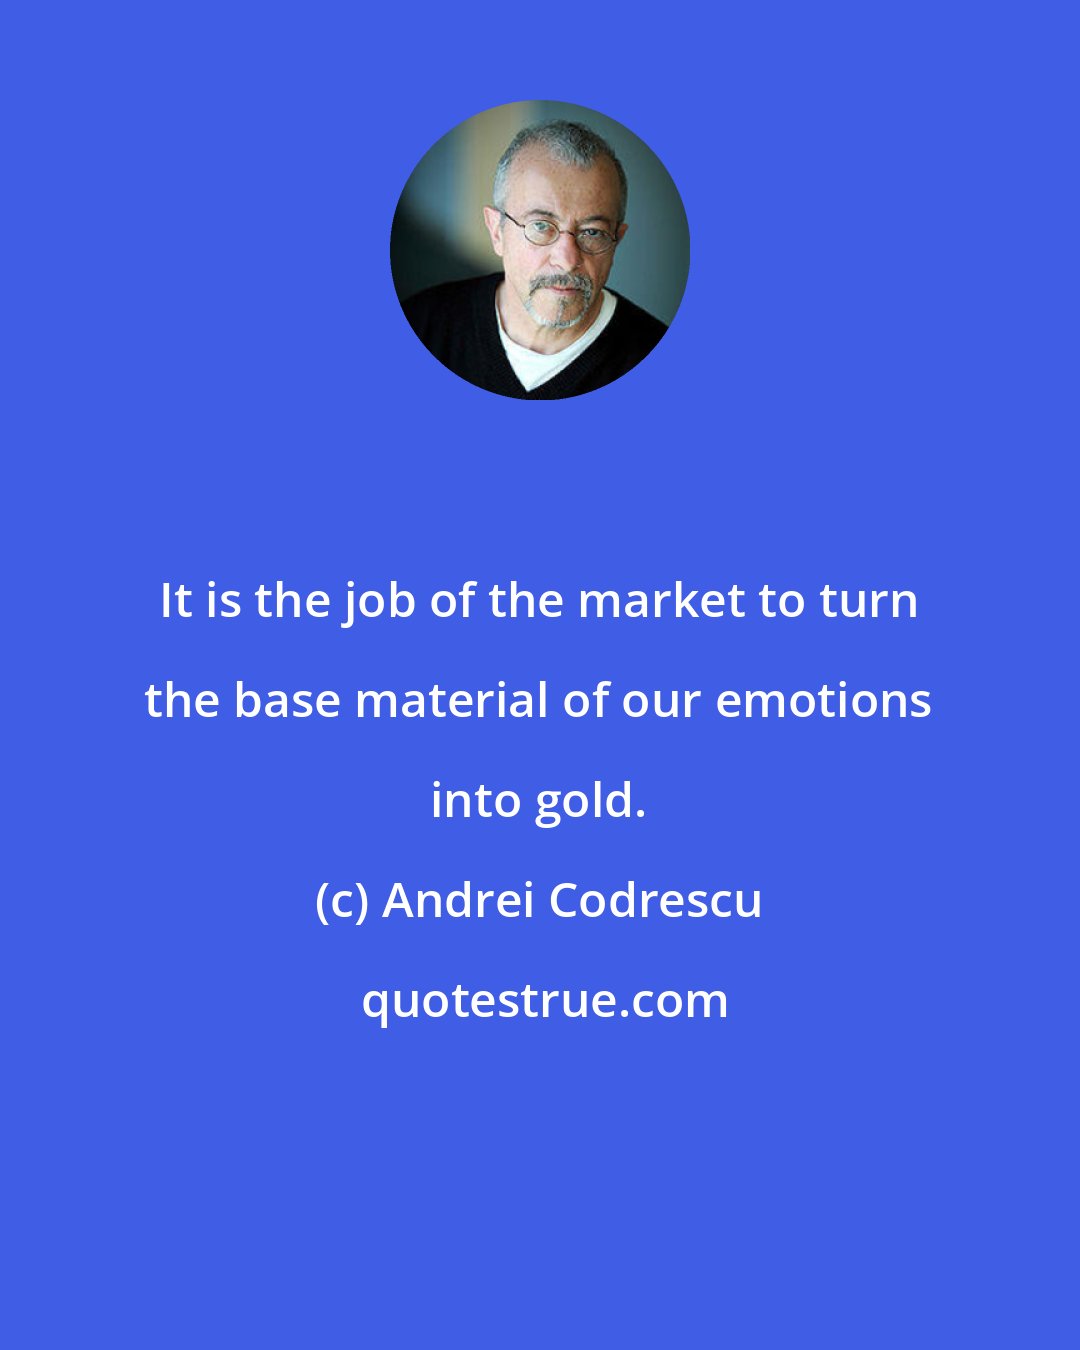 Andrei Codrescu: It is the job of the market to turn the base material of our emotions into gold.